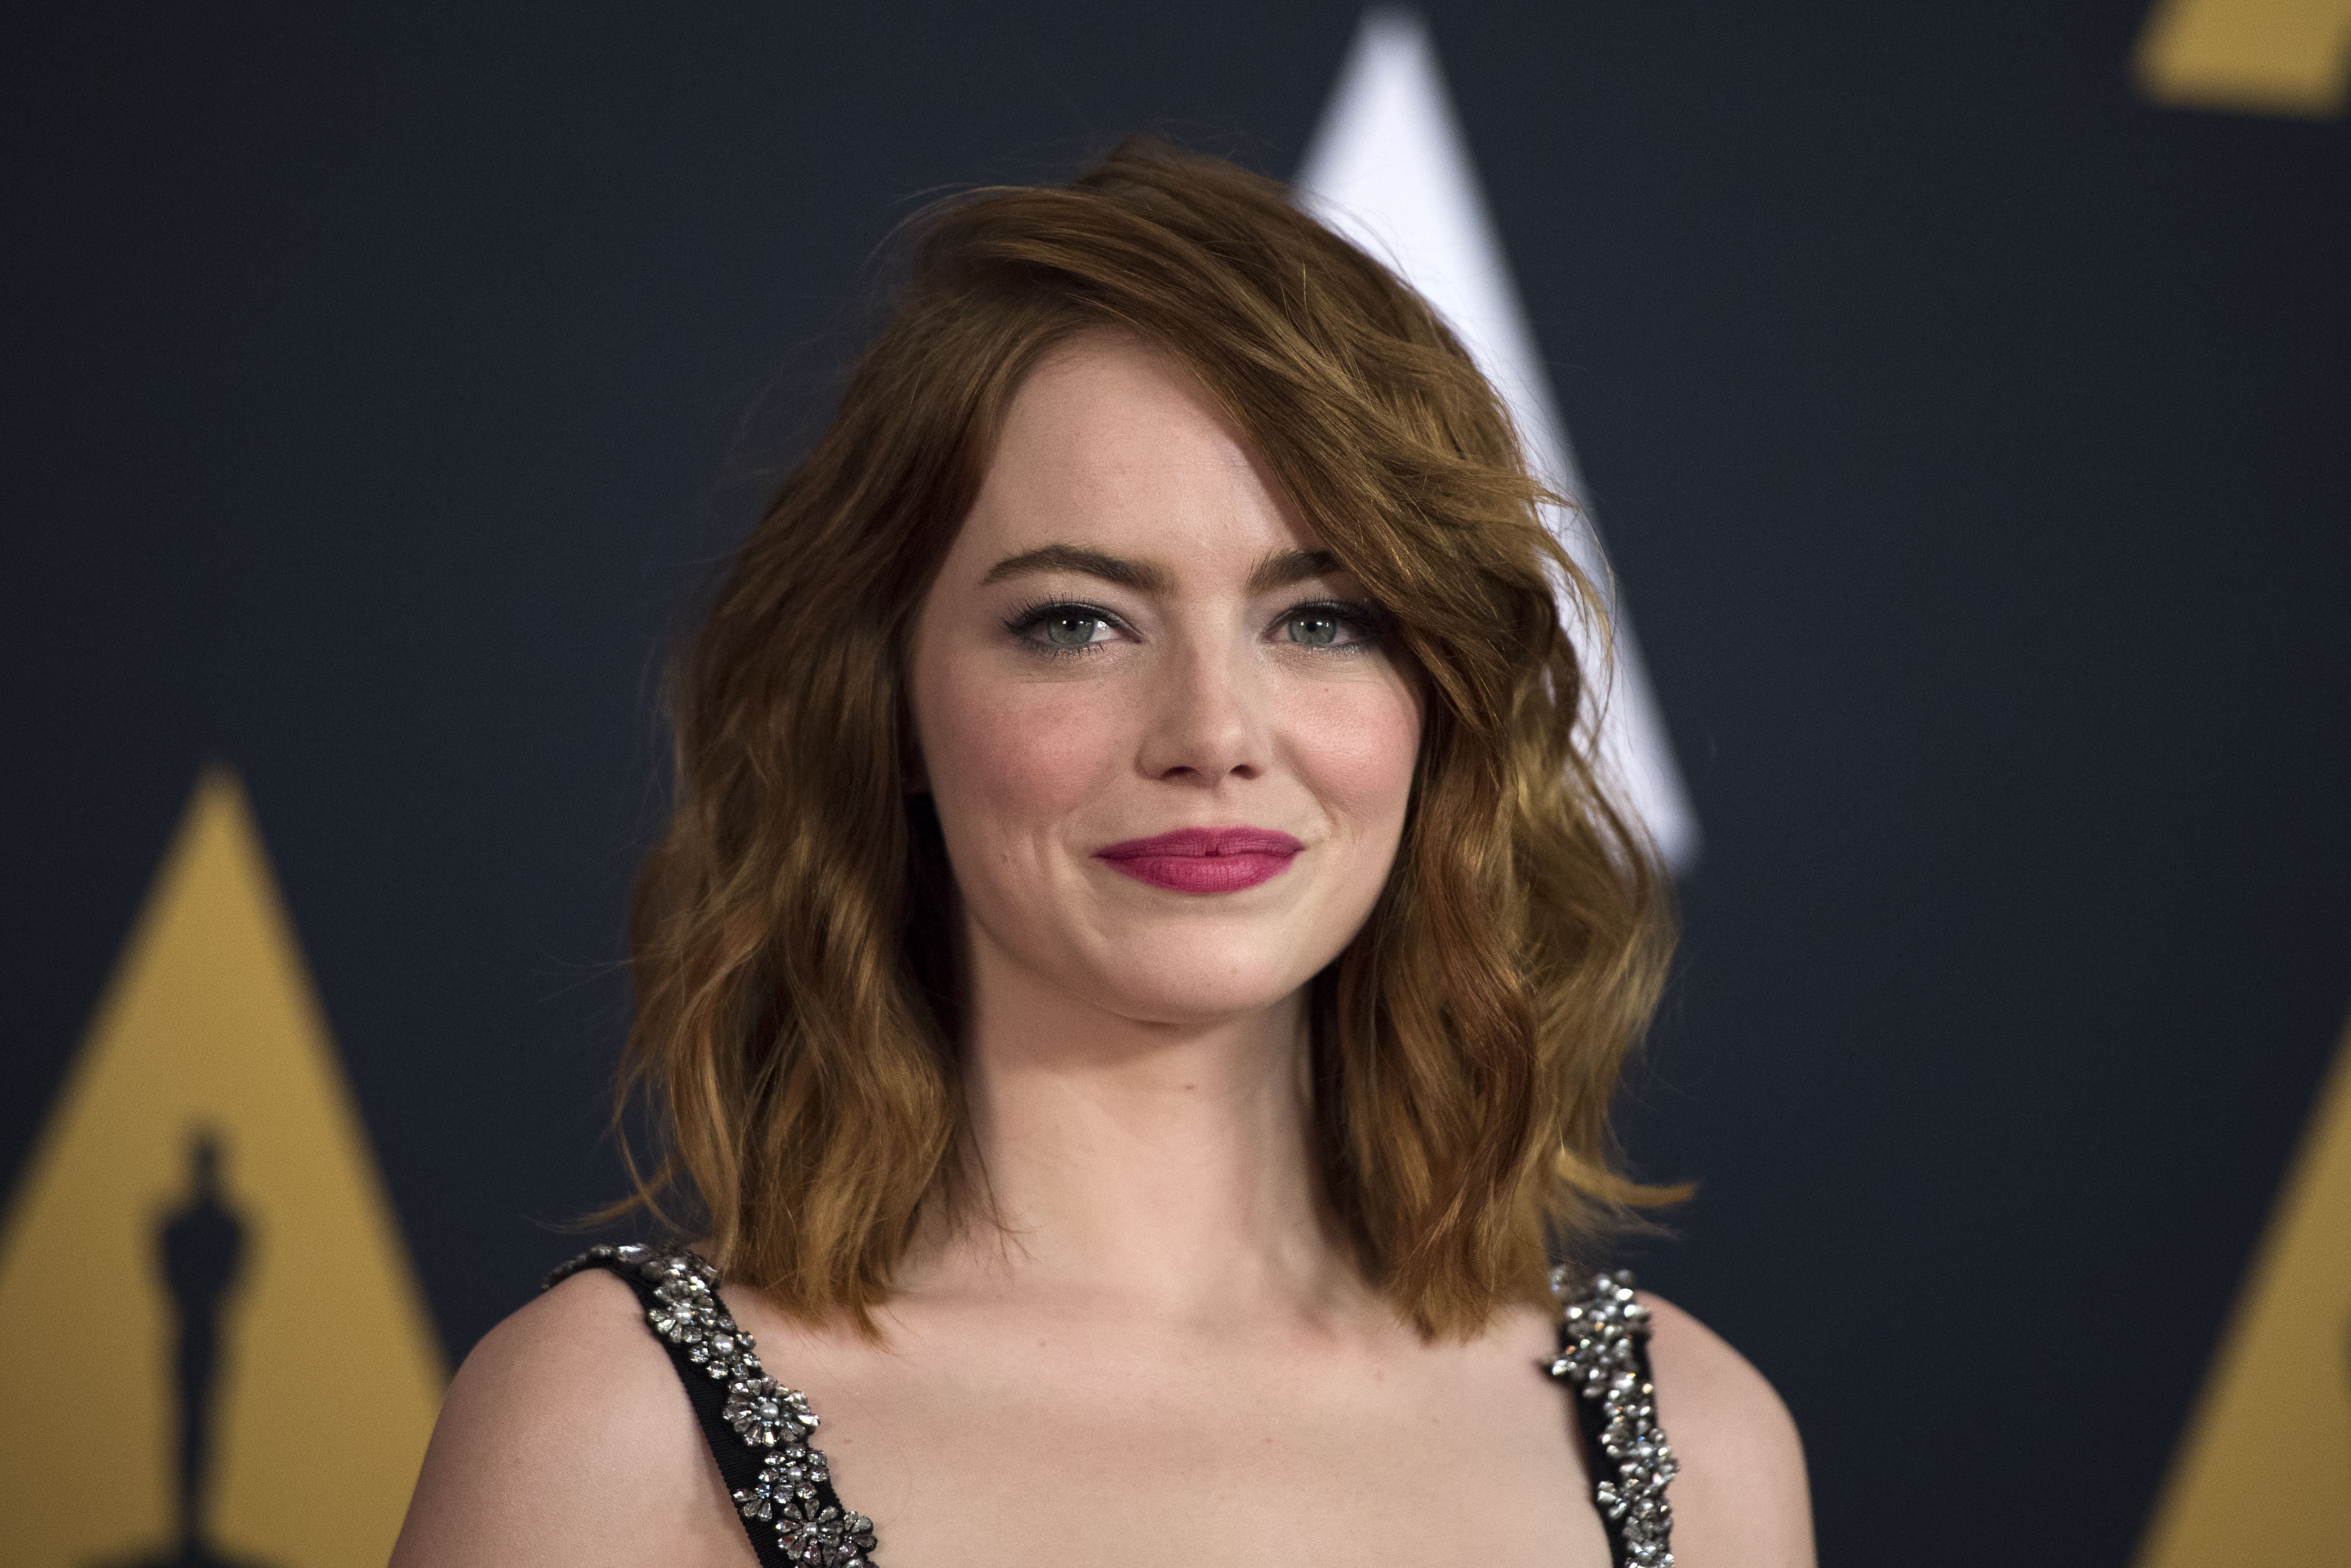 Actress Emma Stone attends the 8th Annual Governors Awards hosted by the Academy of Motion Picture Arts and Sciences on November 12, 2016, at the Hollywood &amp; Highland Center in Hollywood, California. (Valerie Macon&mdash;Getty Images)